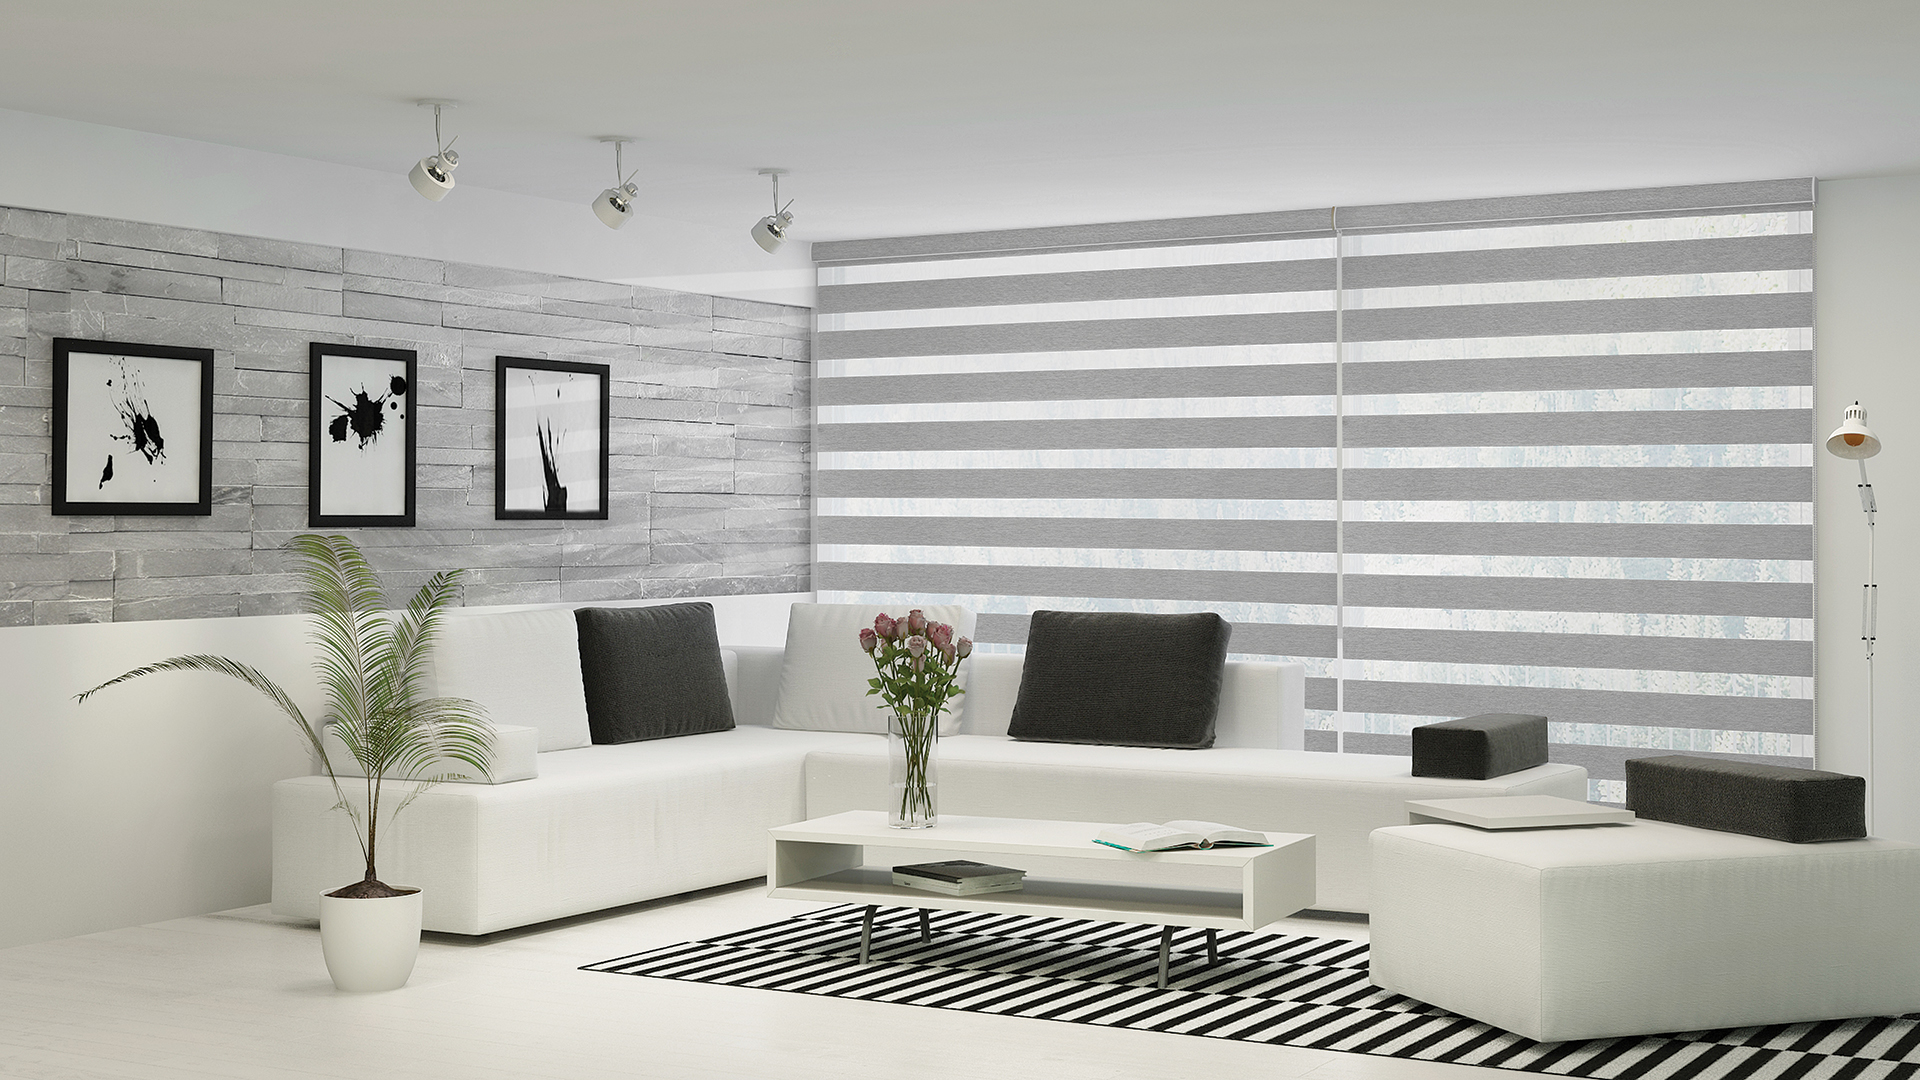 3 Reasons Why You Should Get Dual Sheer Shades / Zebra Blinds